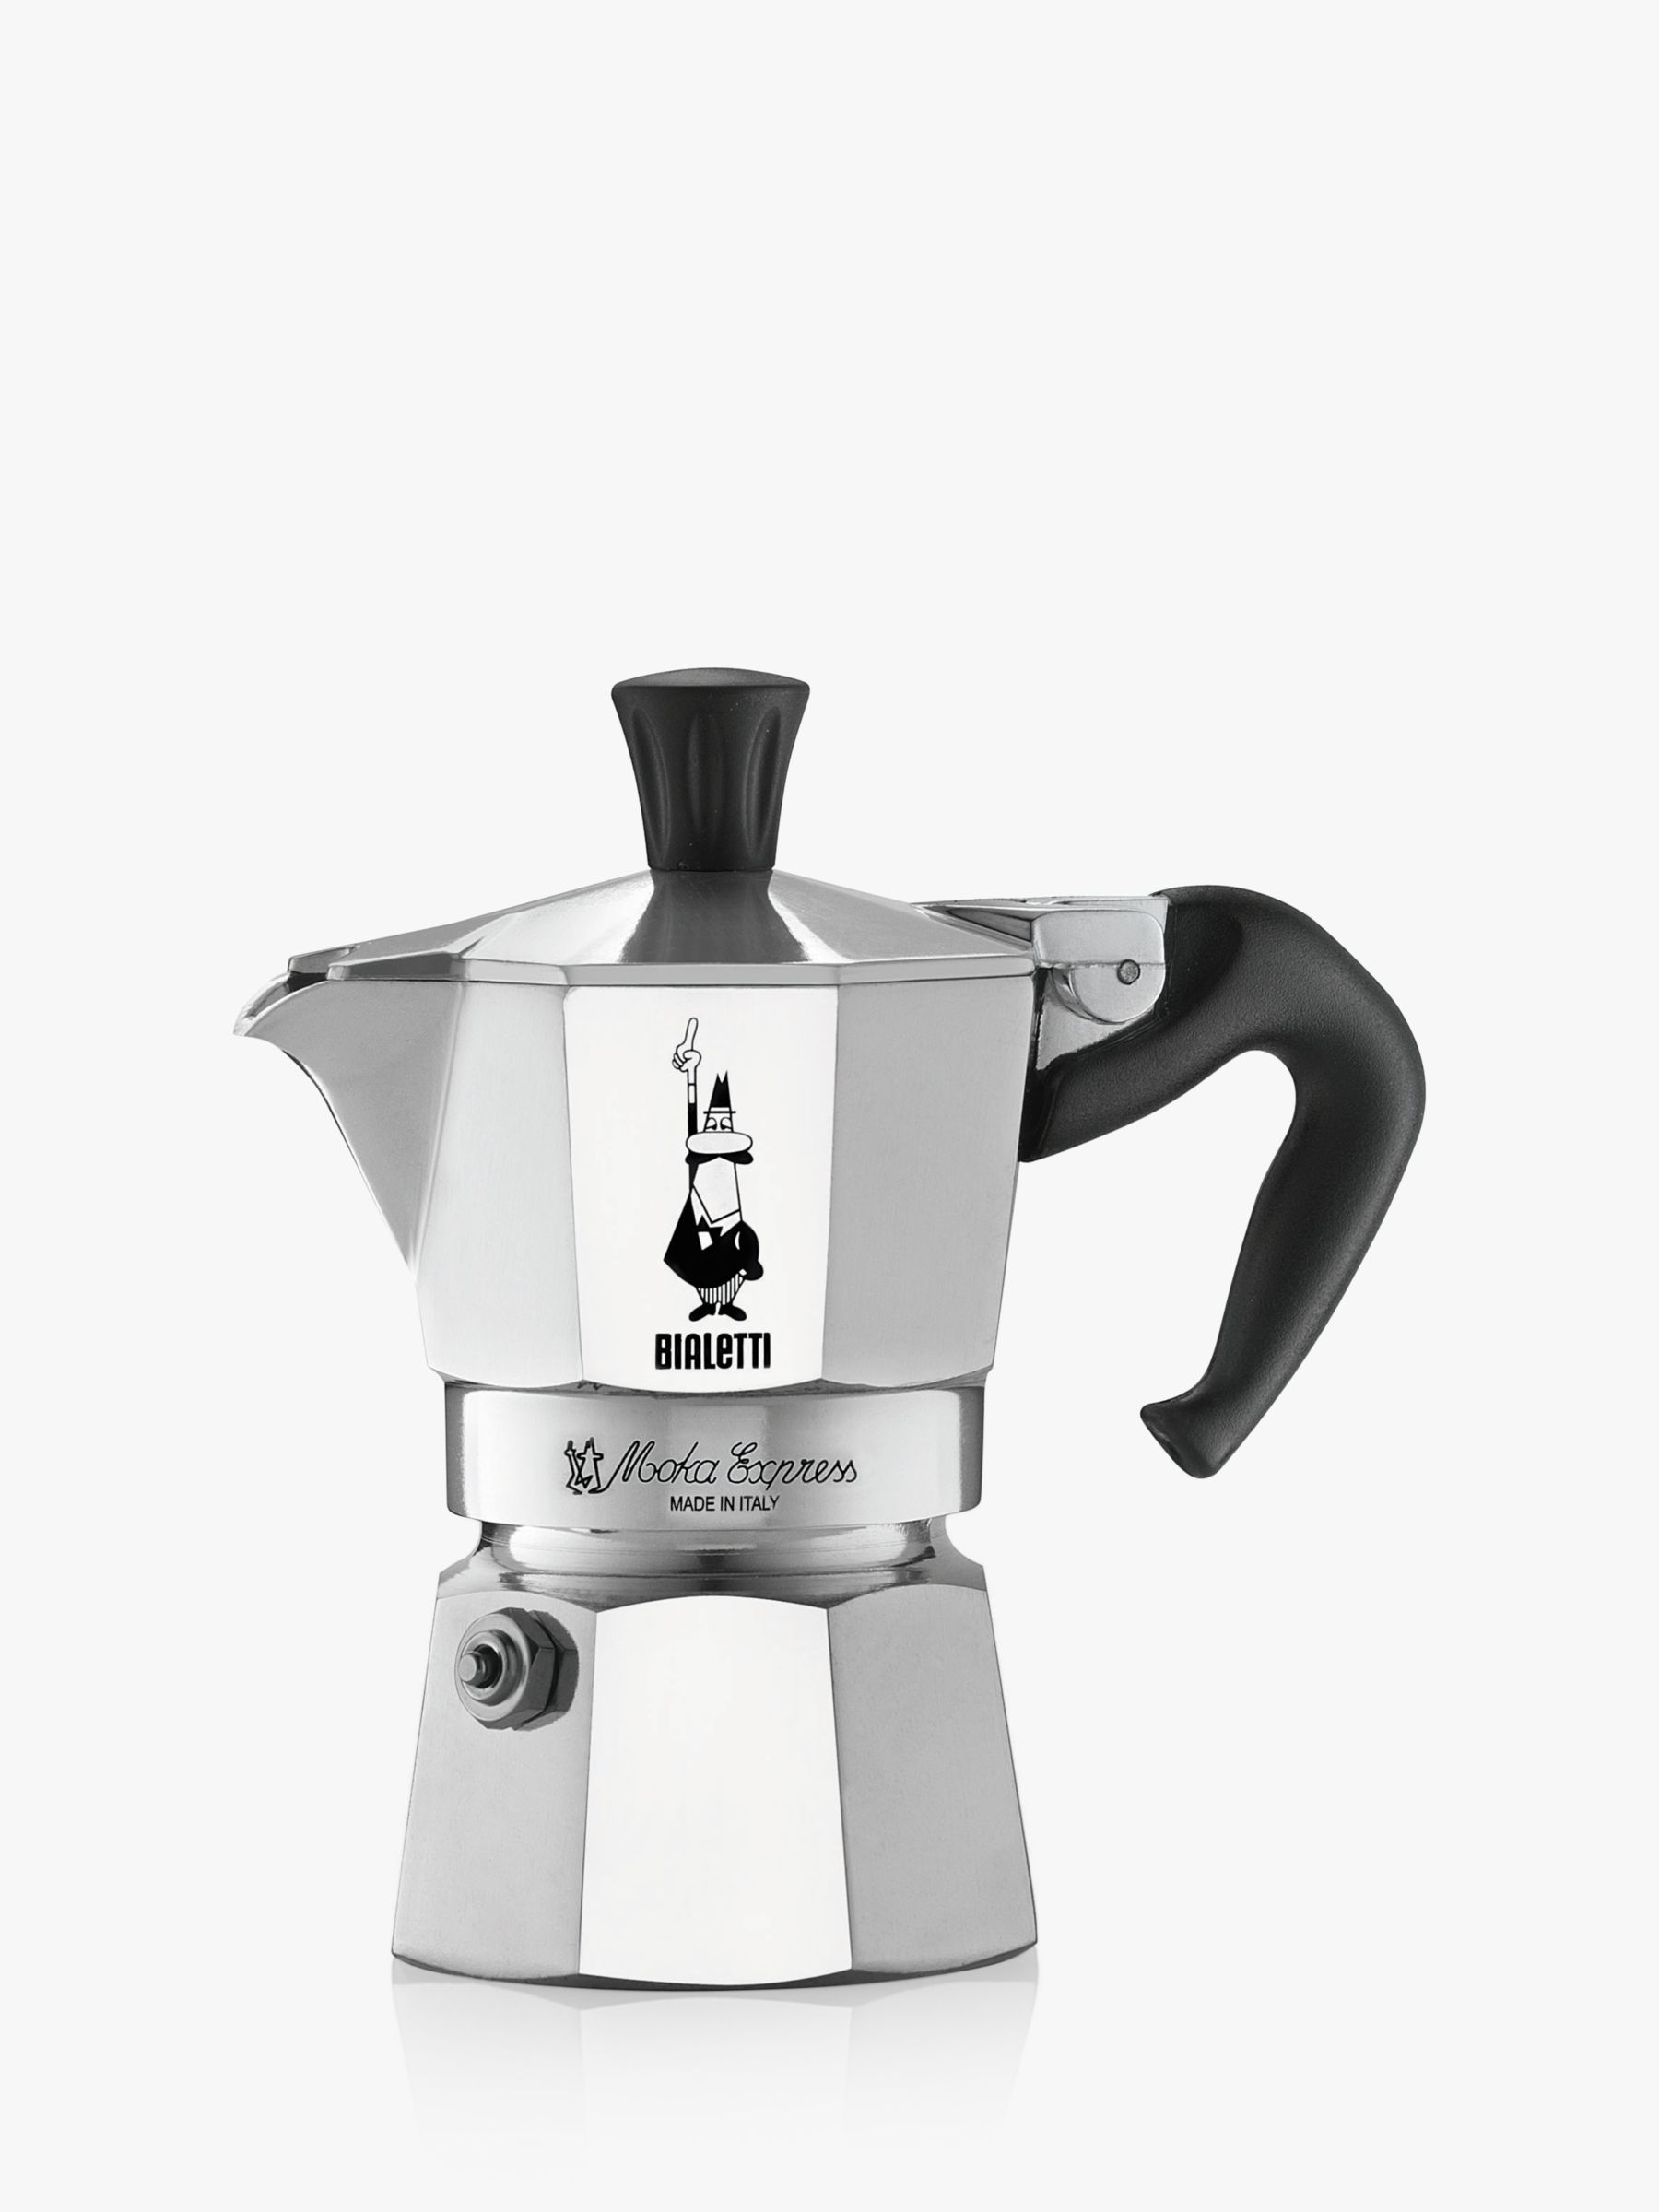 Is Bialetti A Good Brand For Cookware?